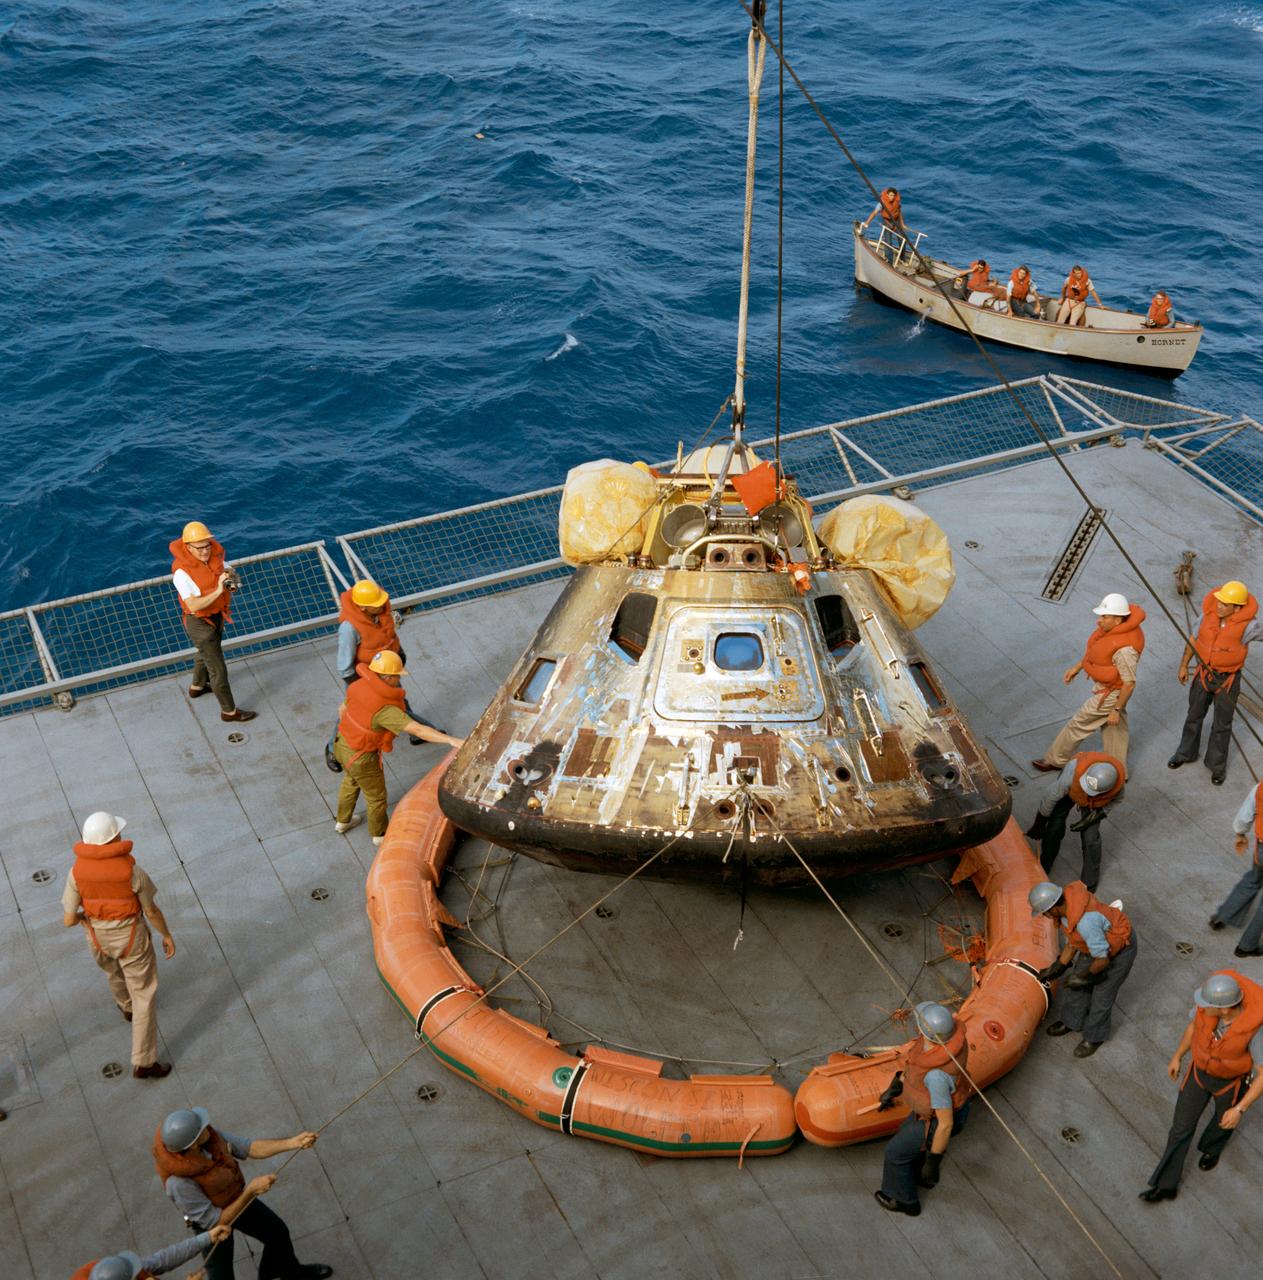 The Apollo 11 spacecraft aboard the USS Hornet after returning from the Moon in 1969